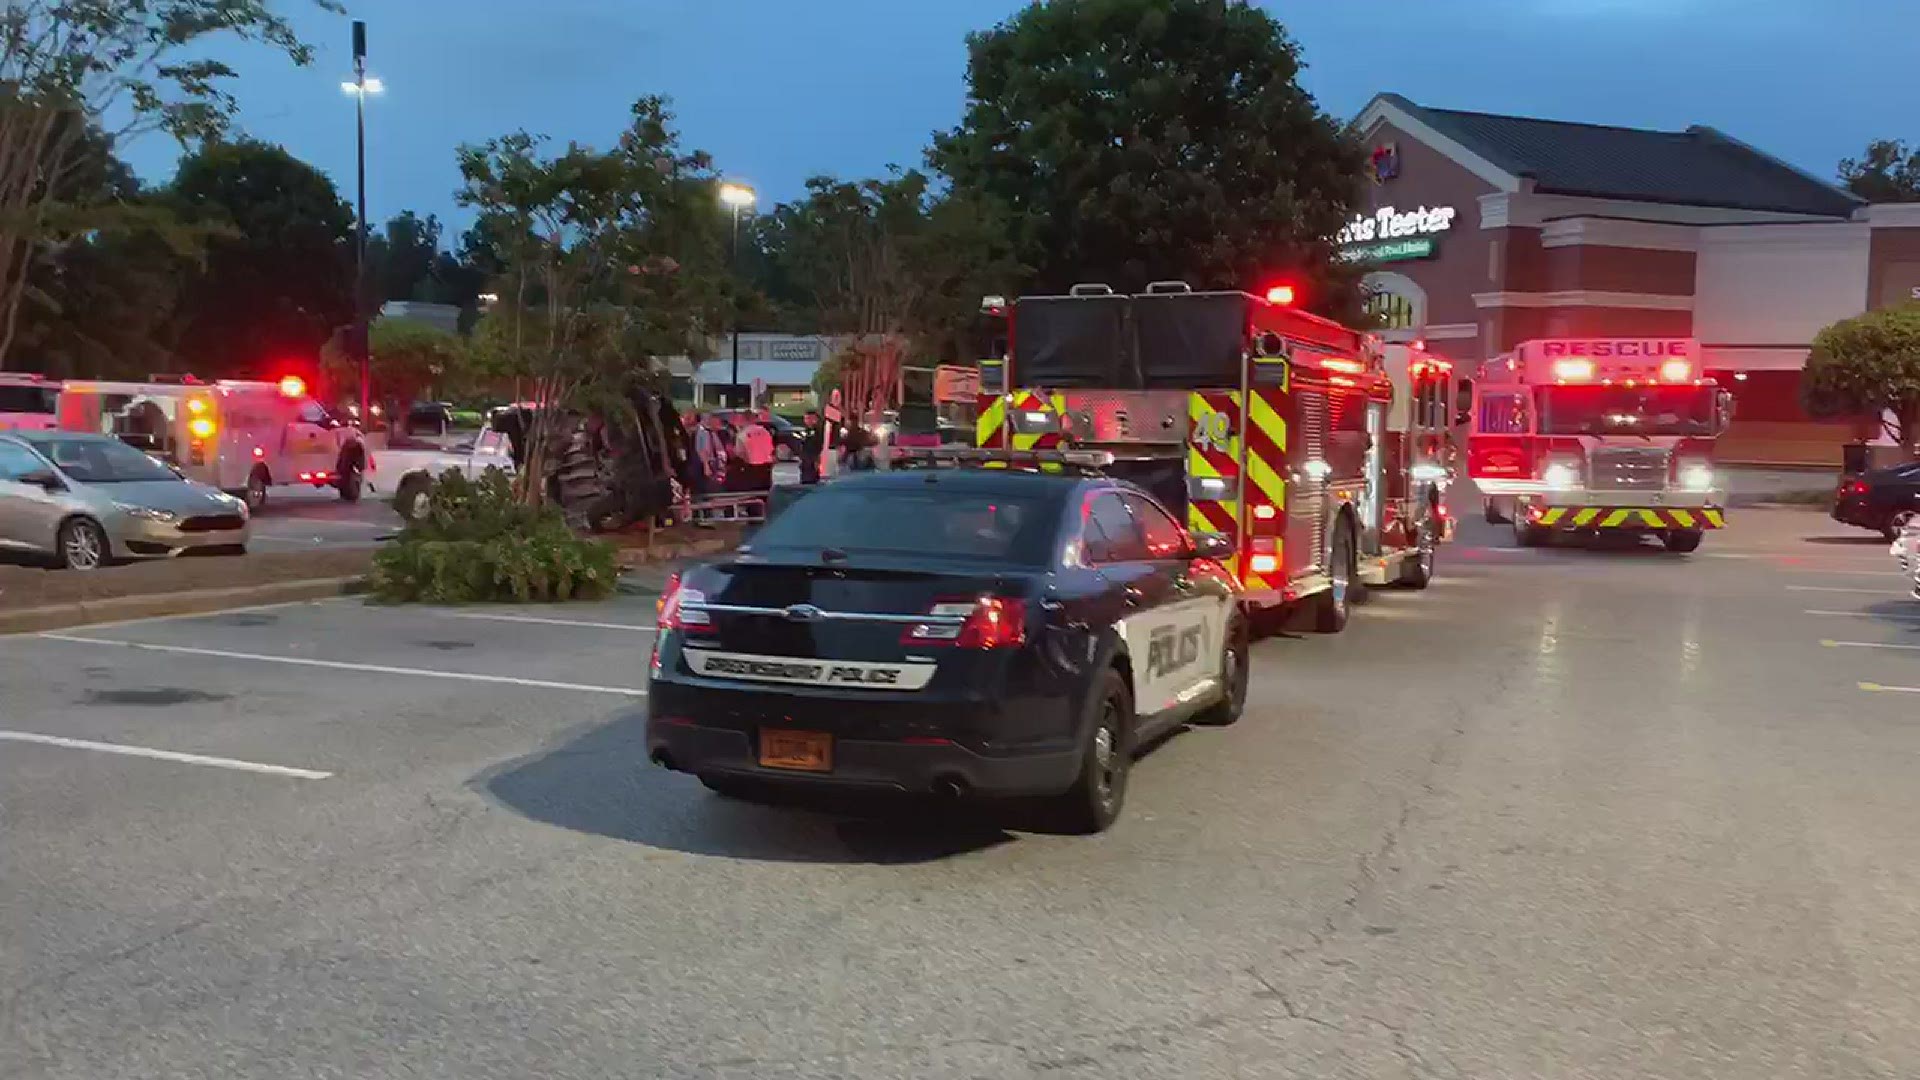 Crash reported at Friendly Shopping Center Friday night.